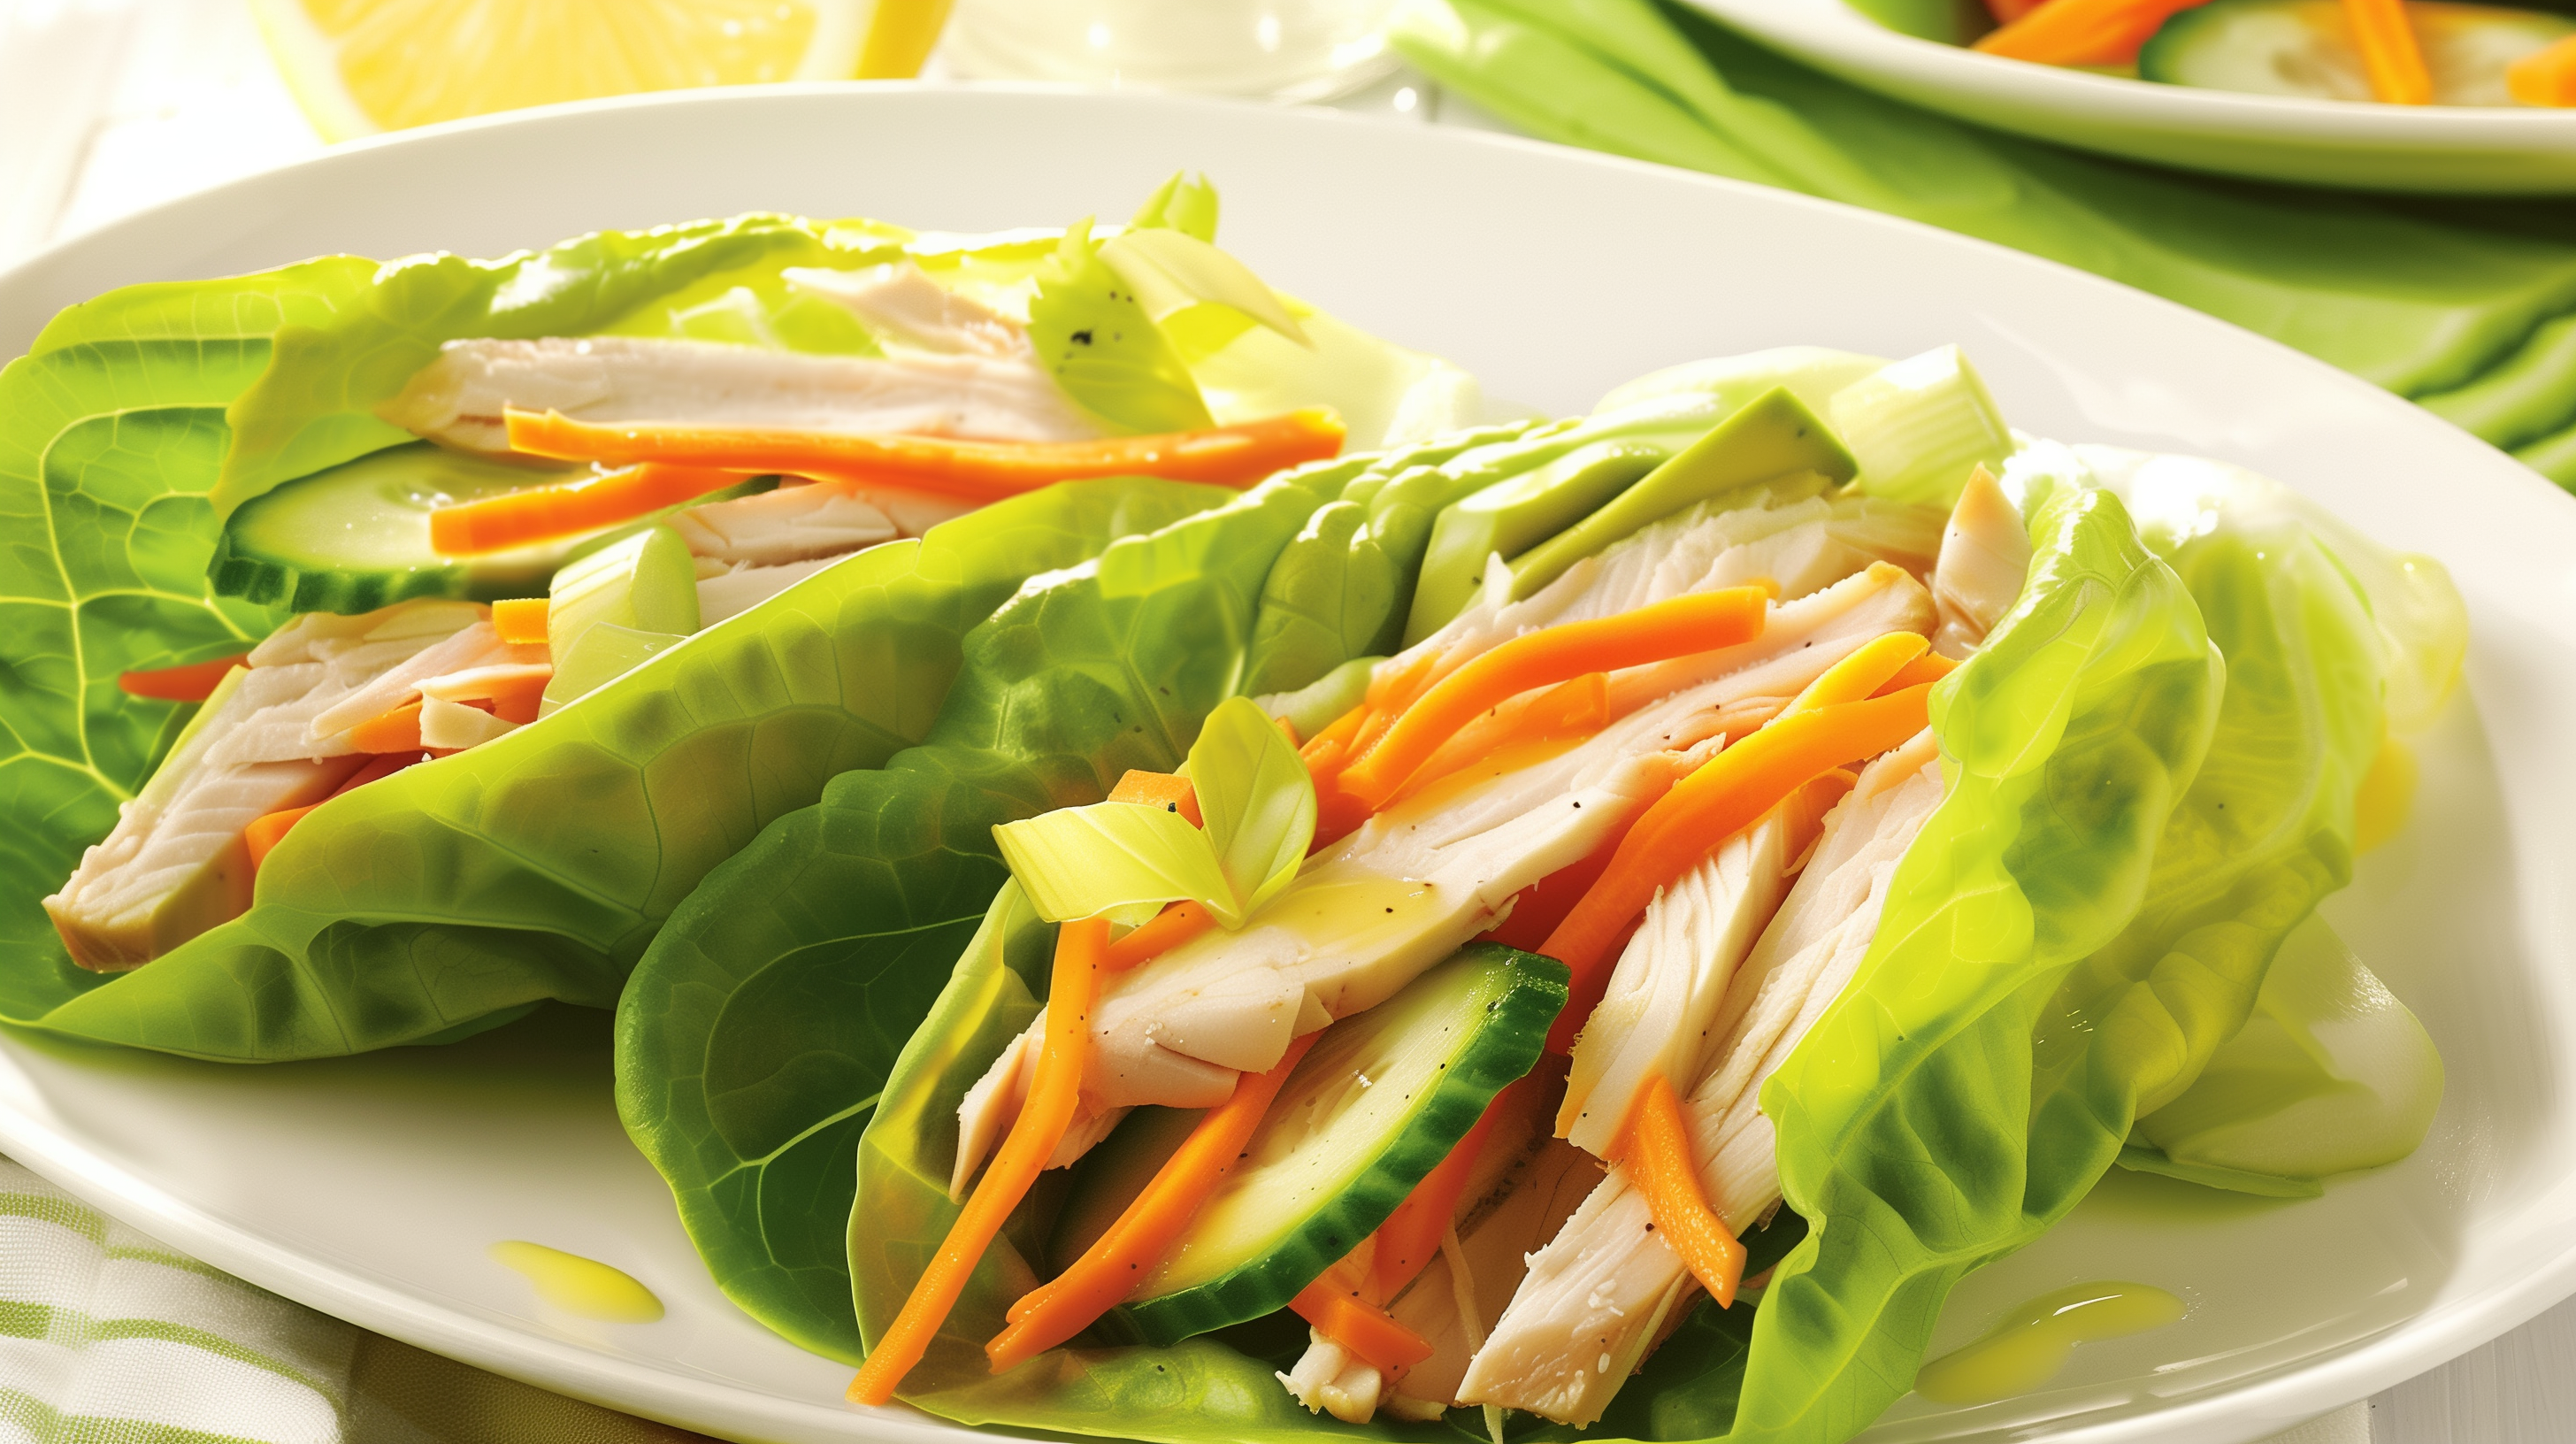 lettuce wraps with turkey, carrots, and cucumber